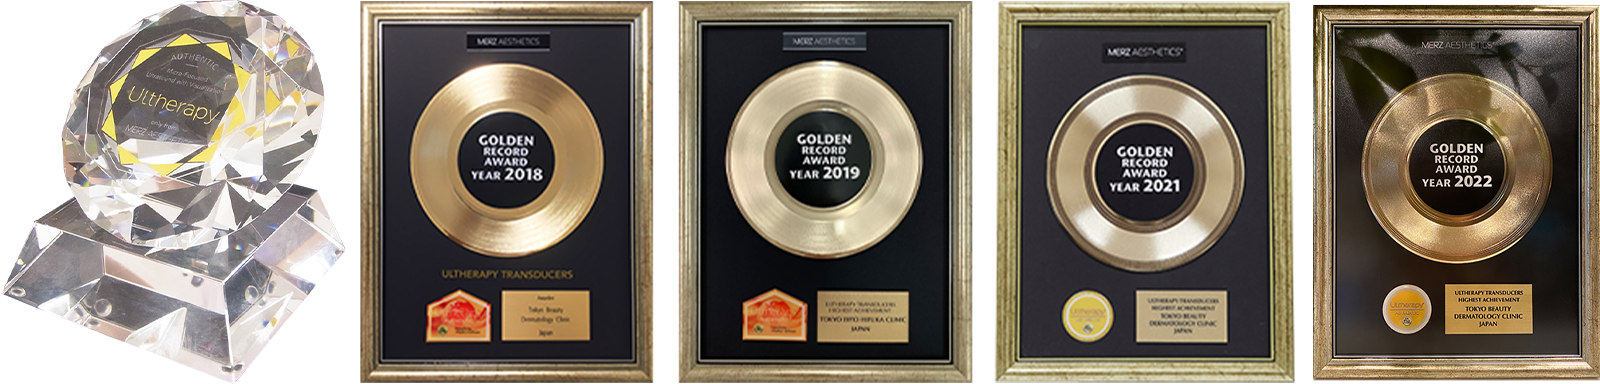 Ultherapy Golden Record Awardの